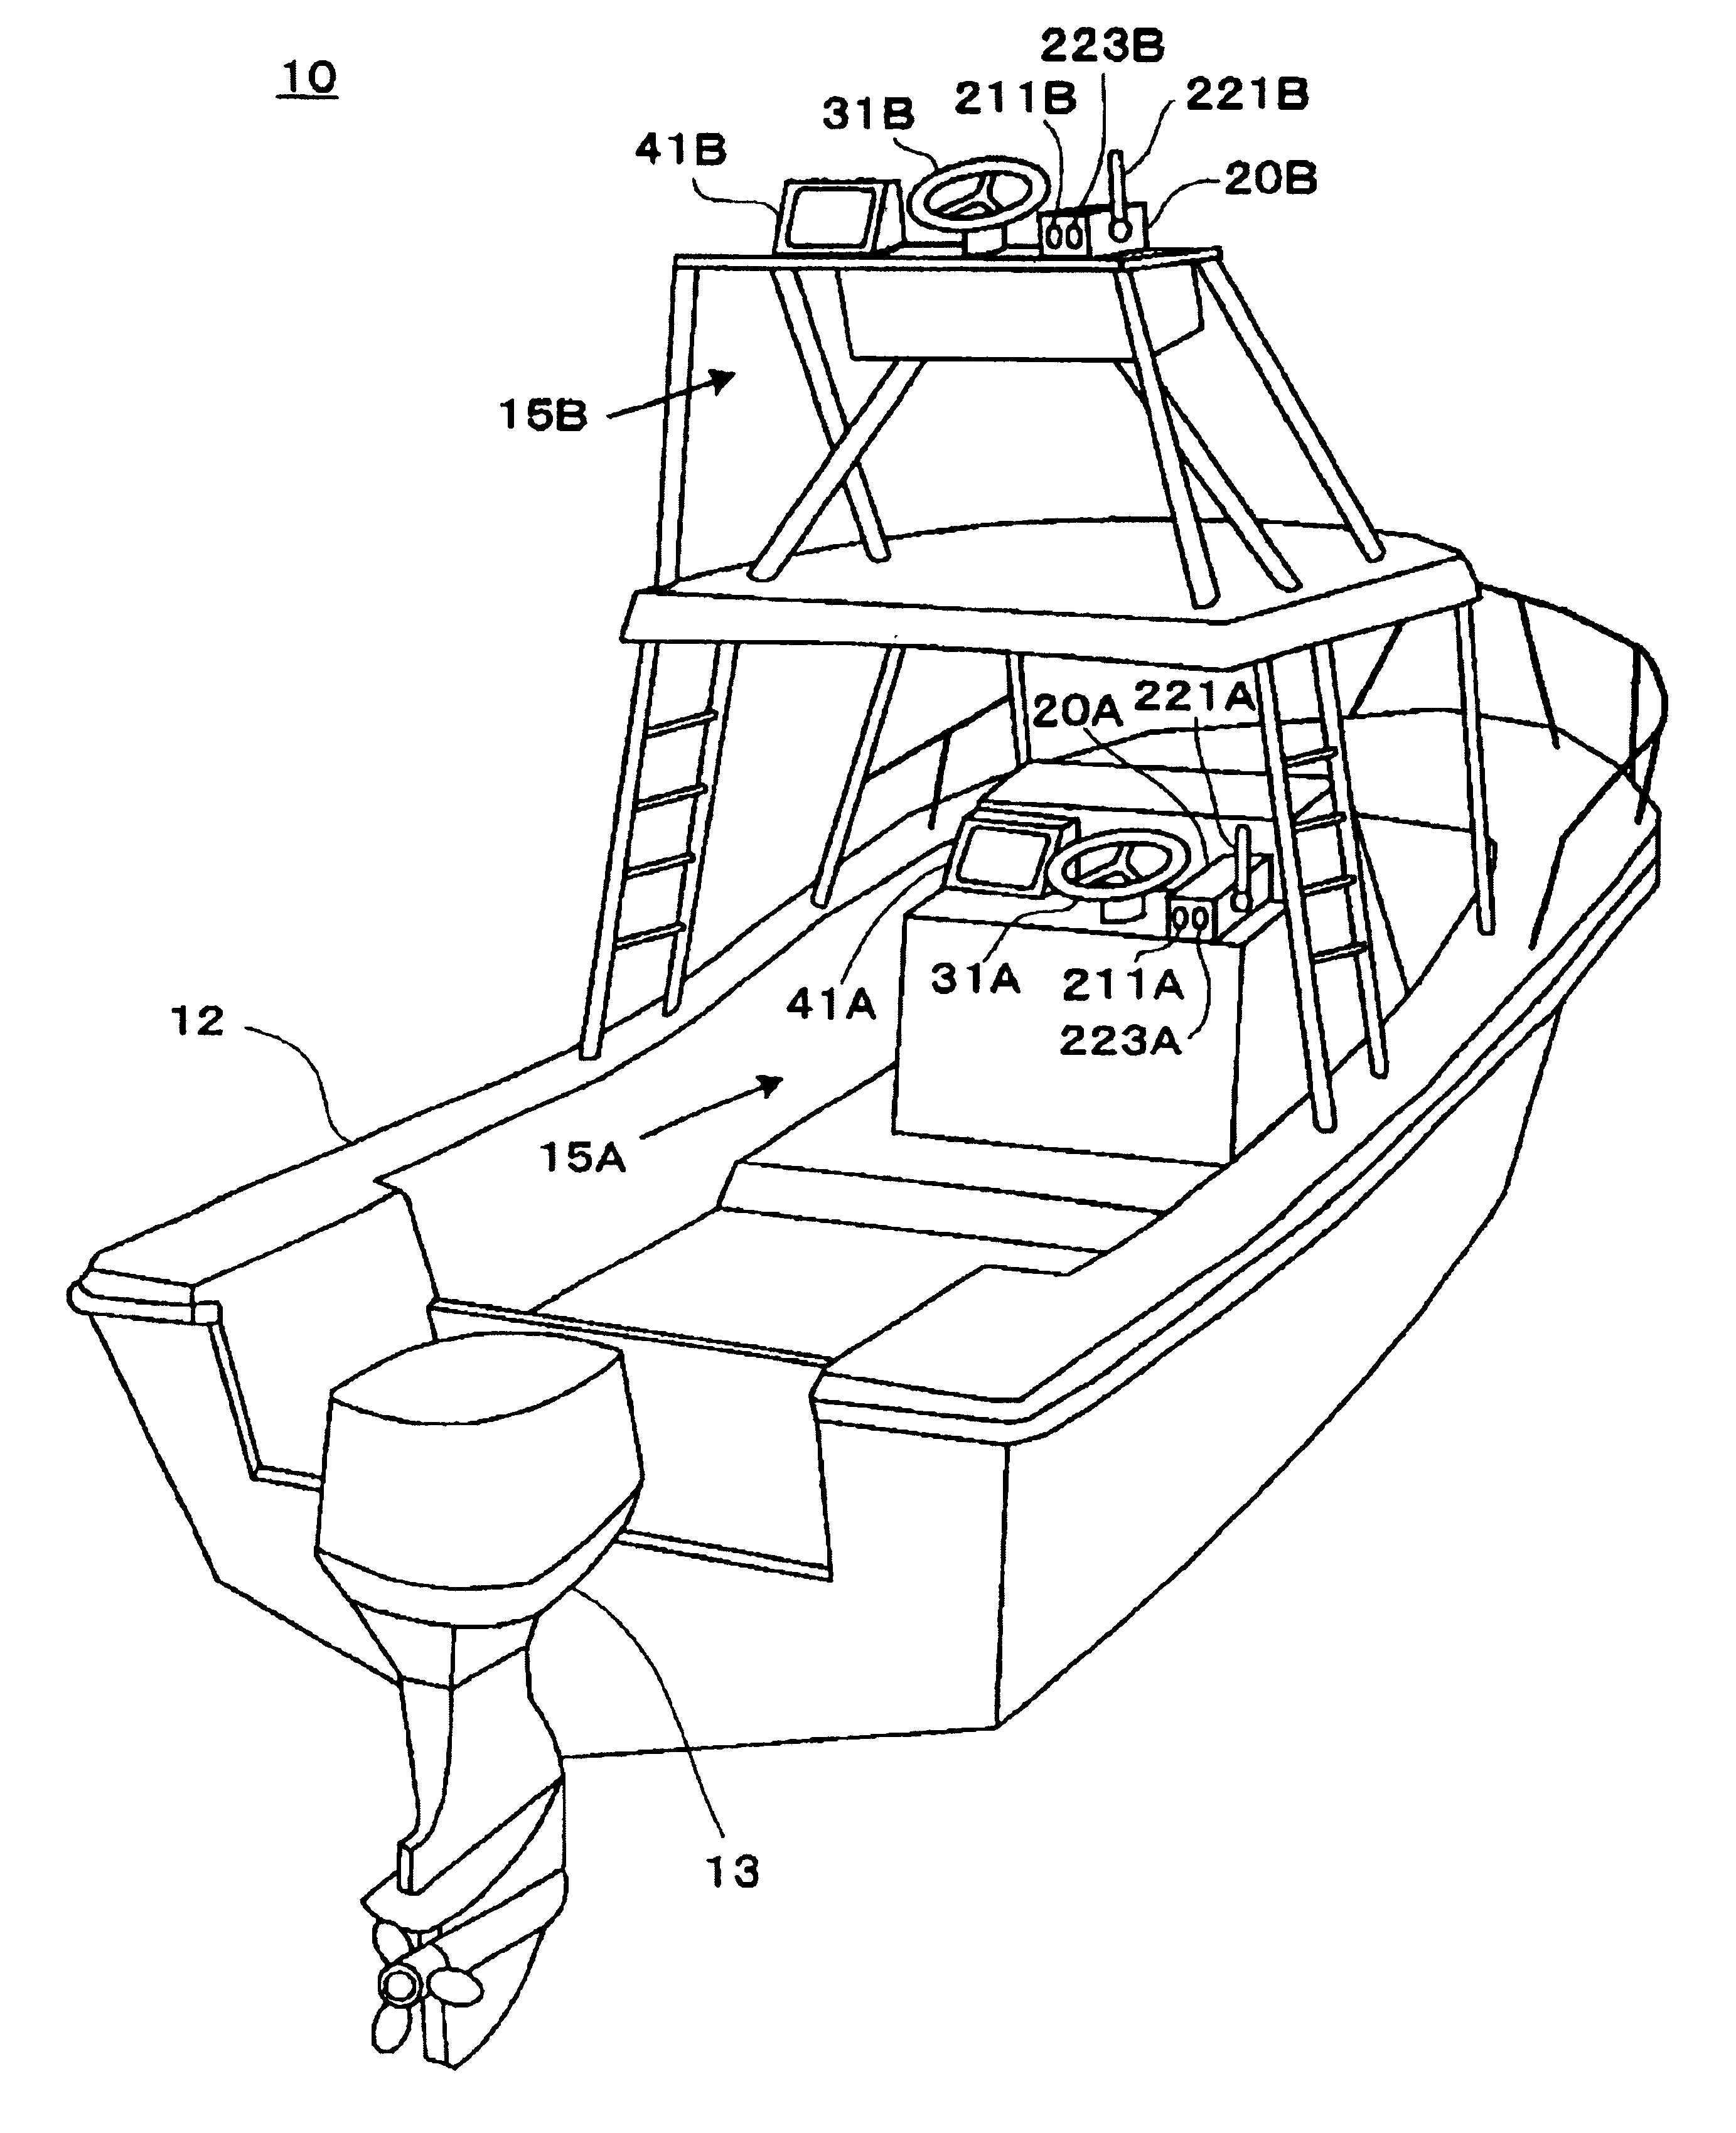 Watercraft control system for watercraft having multiple control stations